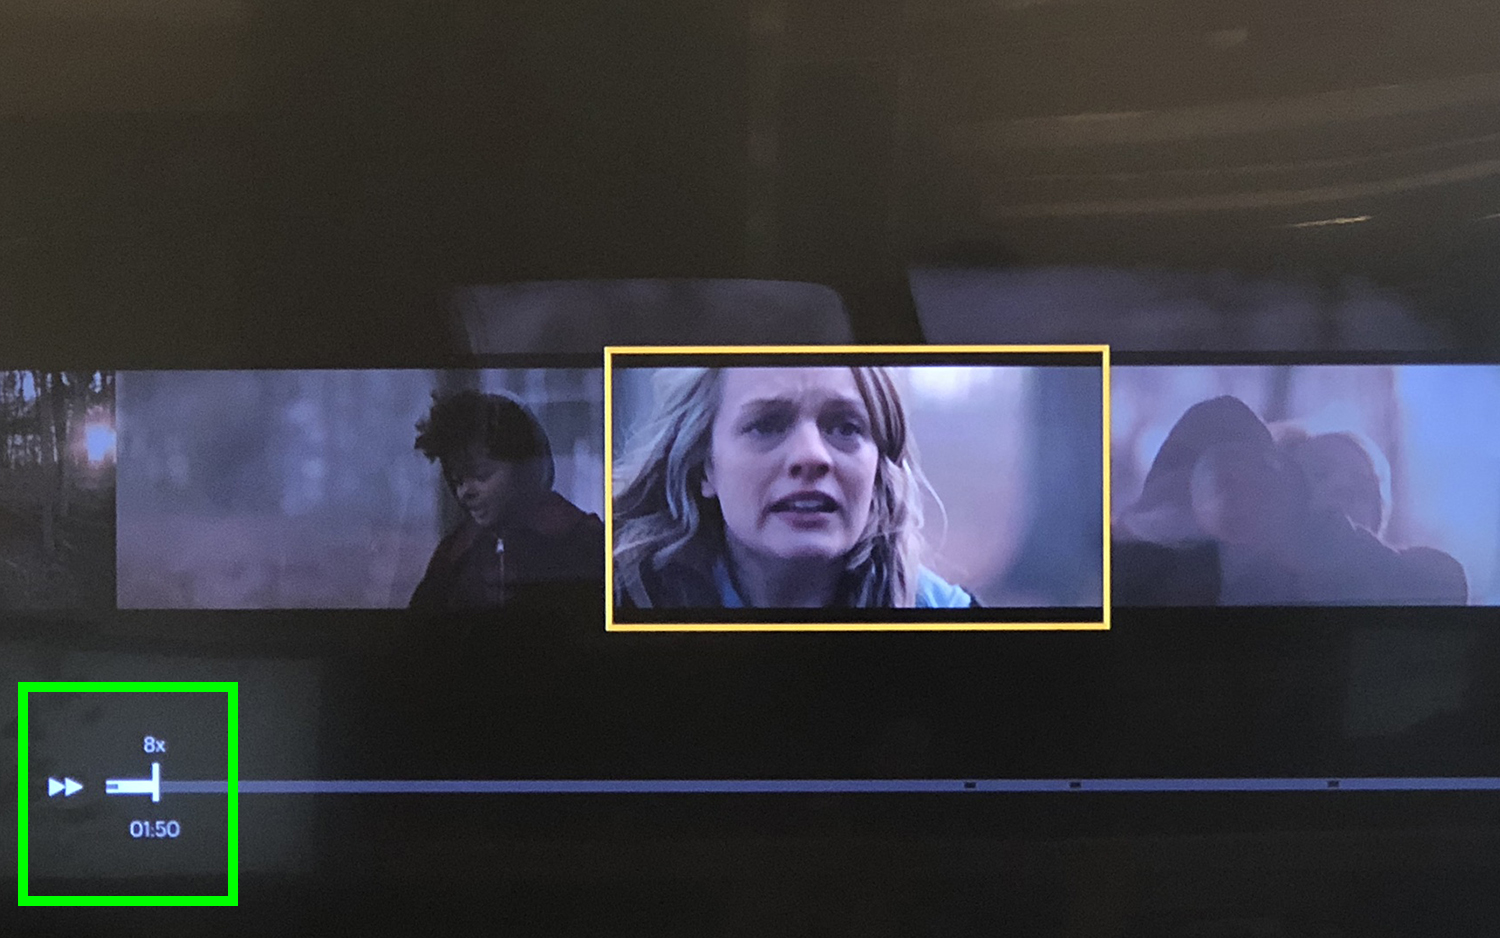 The Fire TV Stick interface fast-forwarding through The Handmaid's Tale